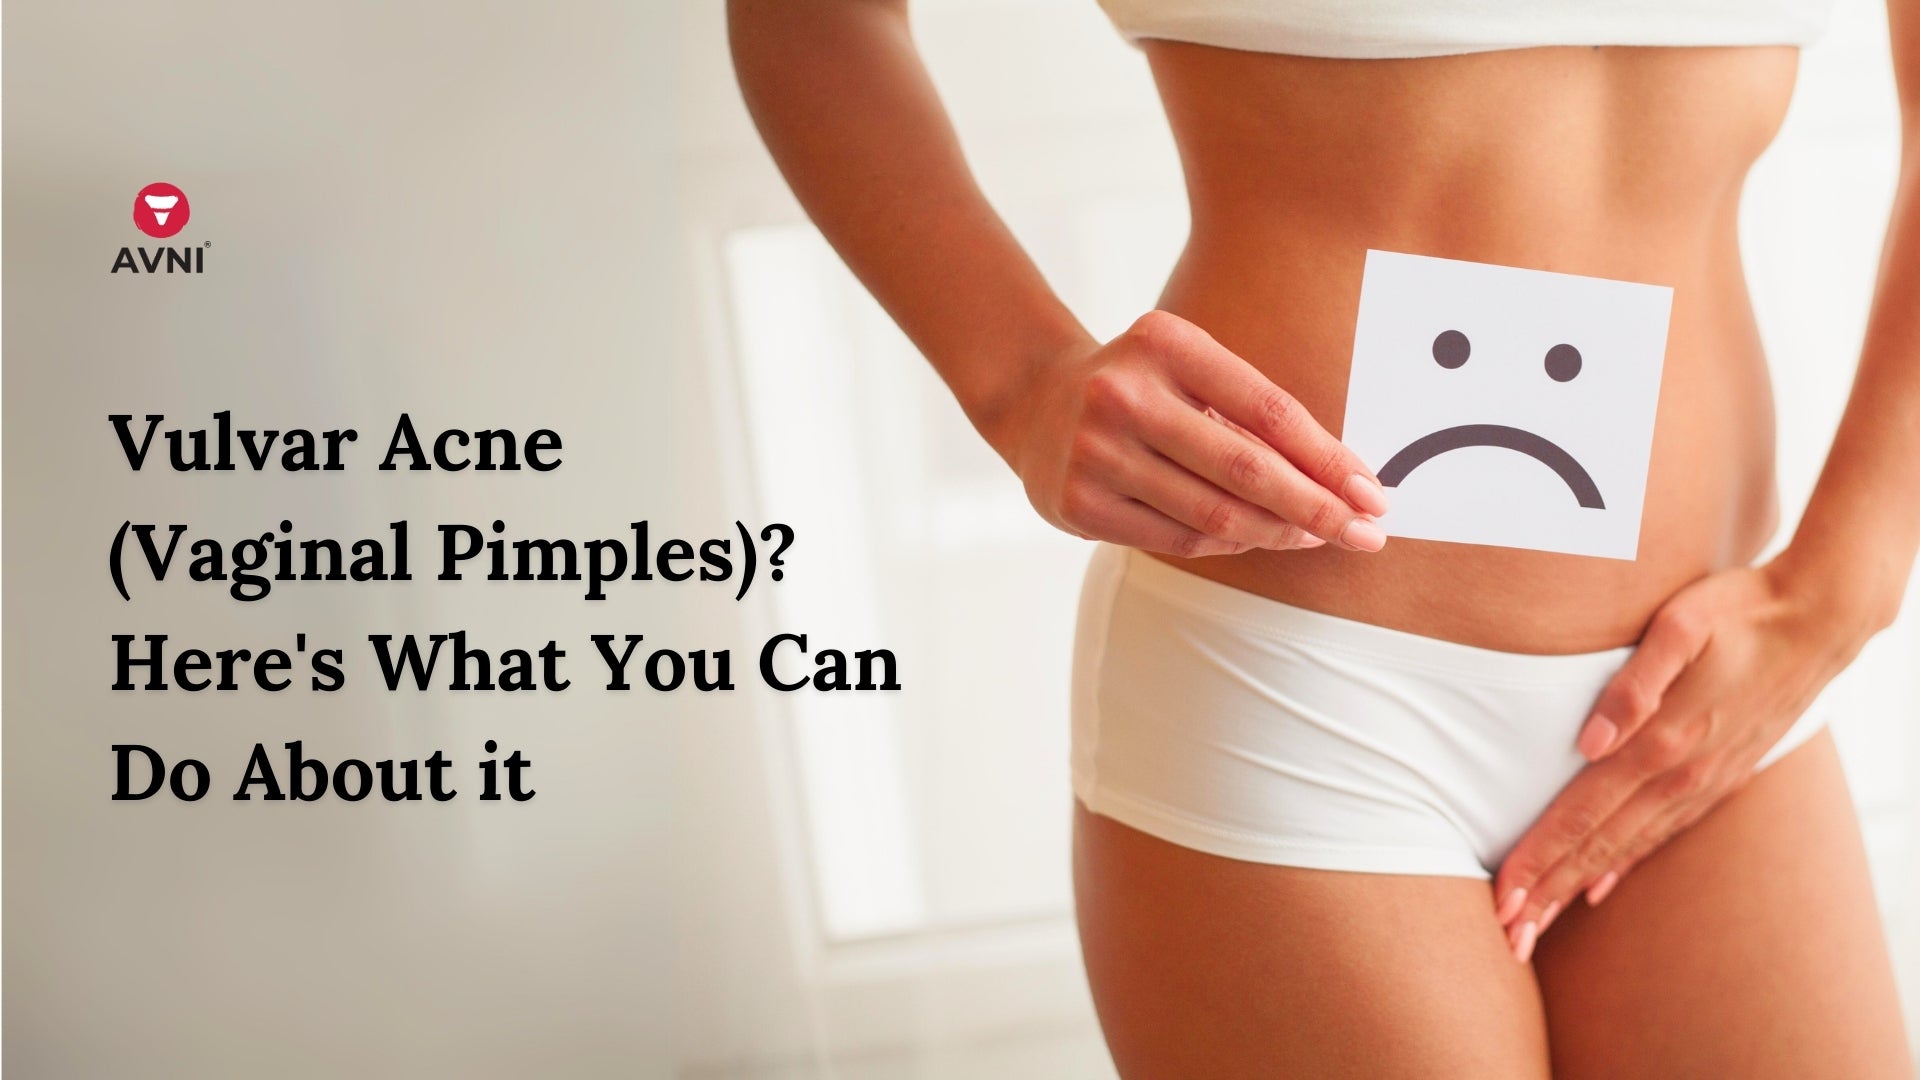 Vulvar Acne (Vaginal Pimples) ? Here's What You Can Do About it